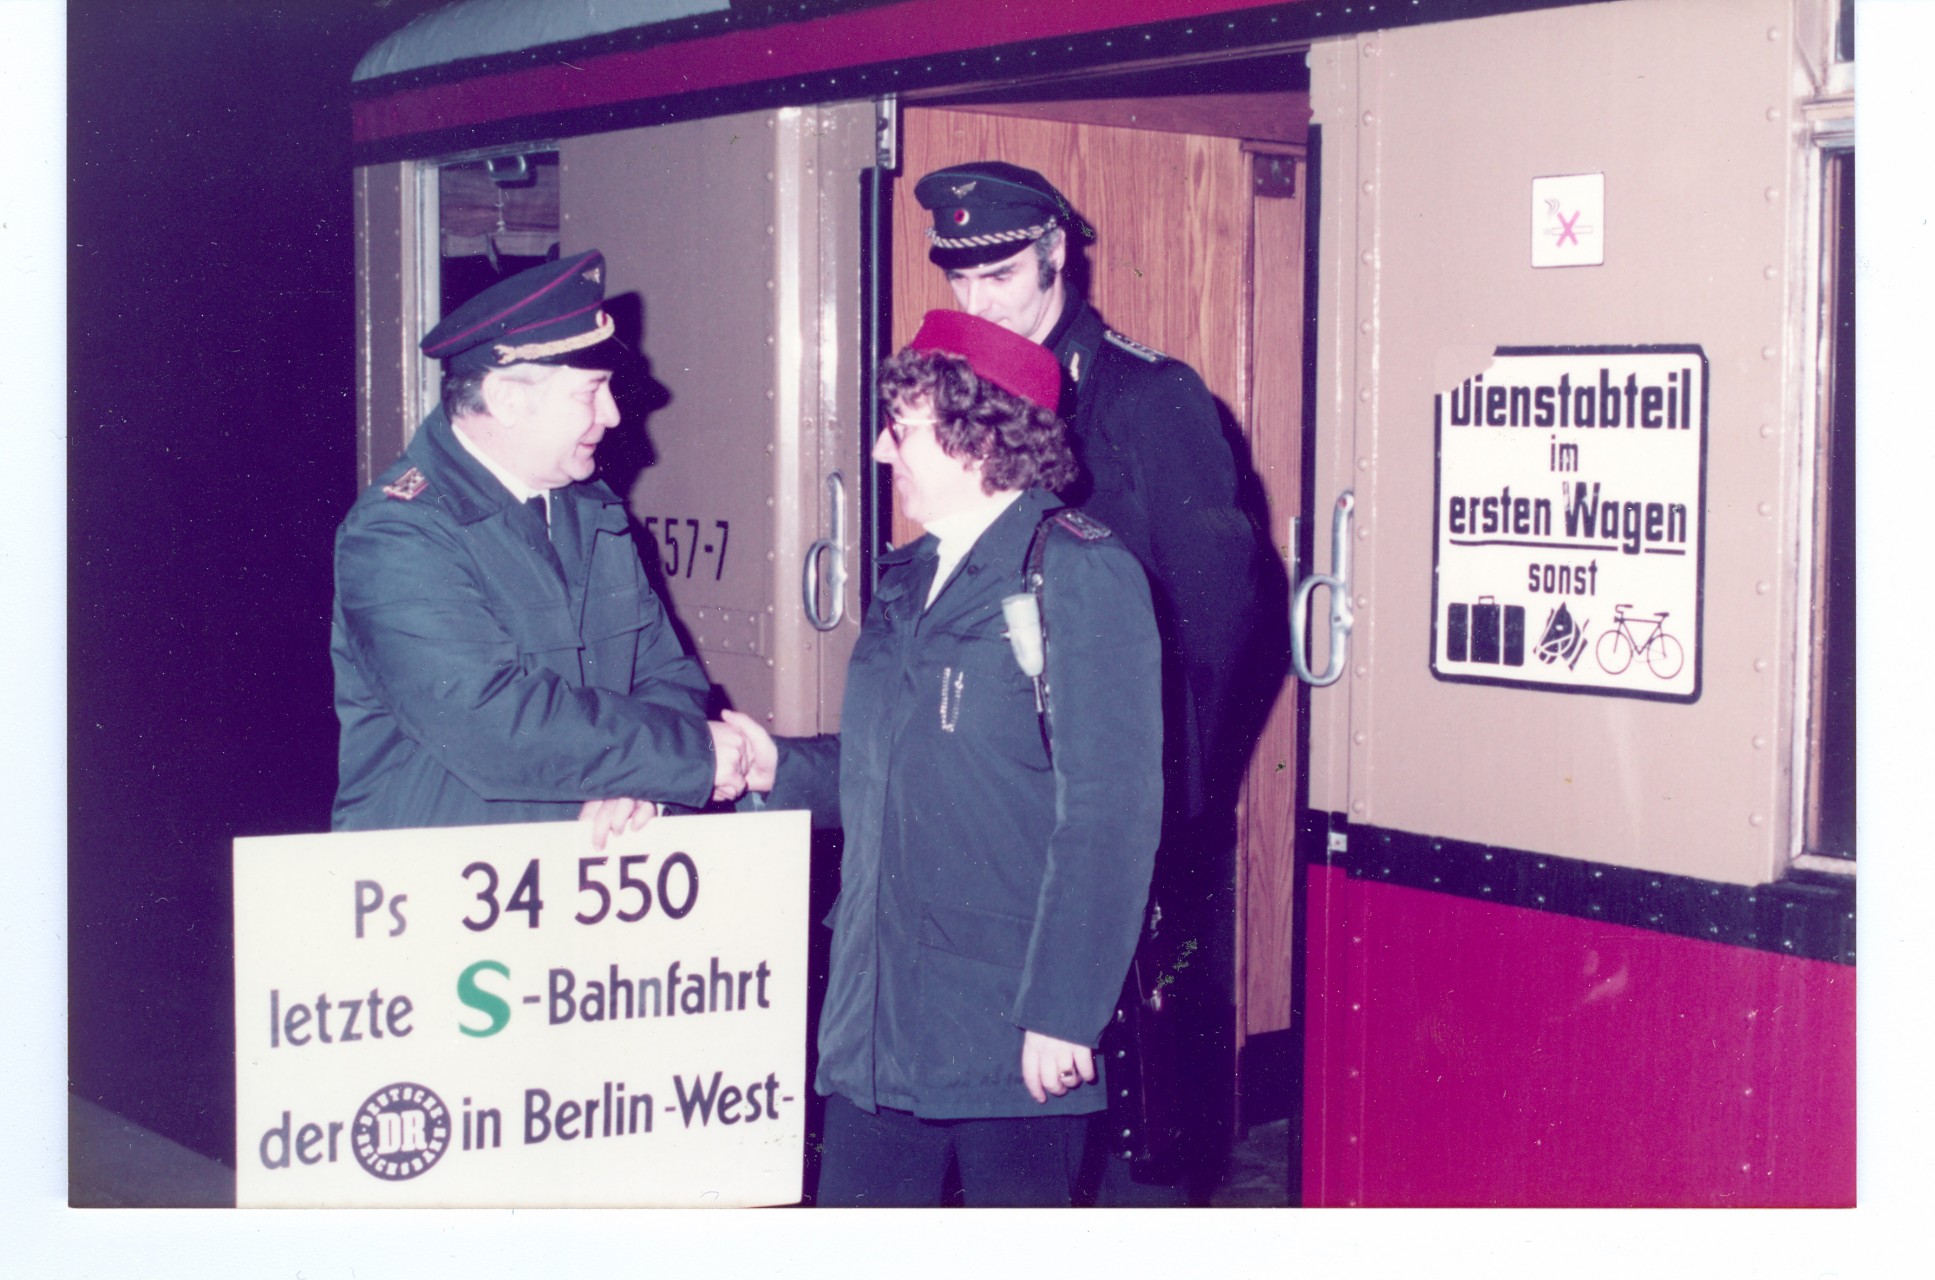 8-1-1984 Ende und Anfang